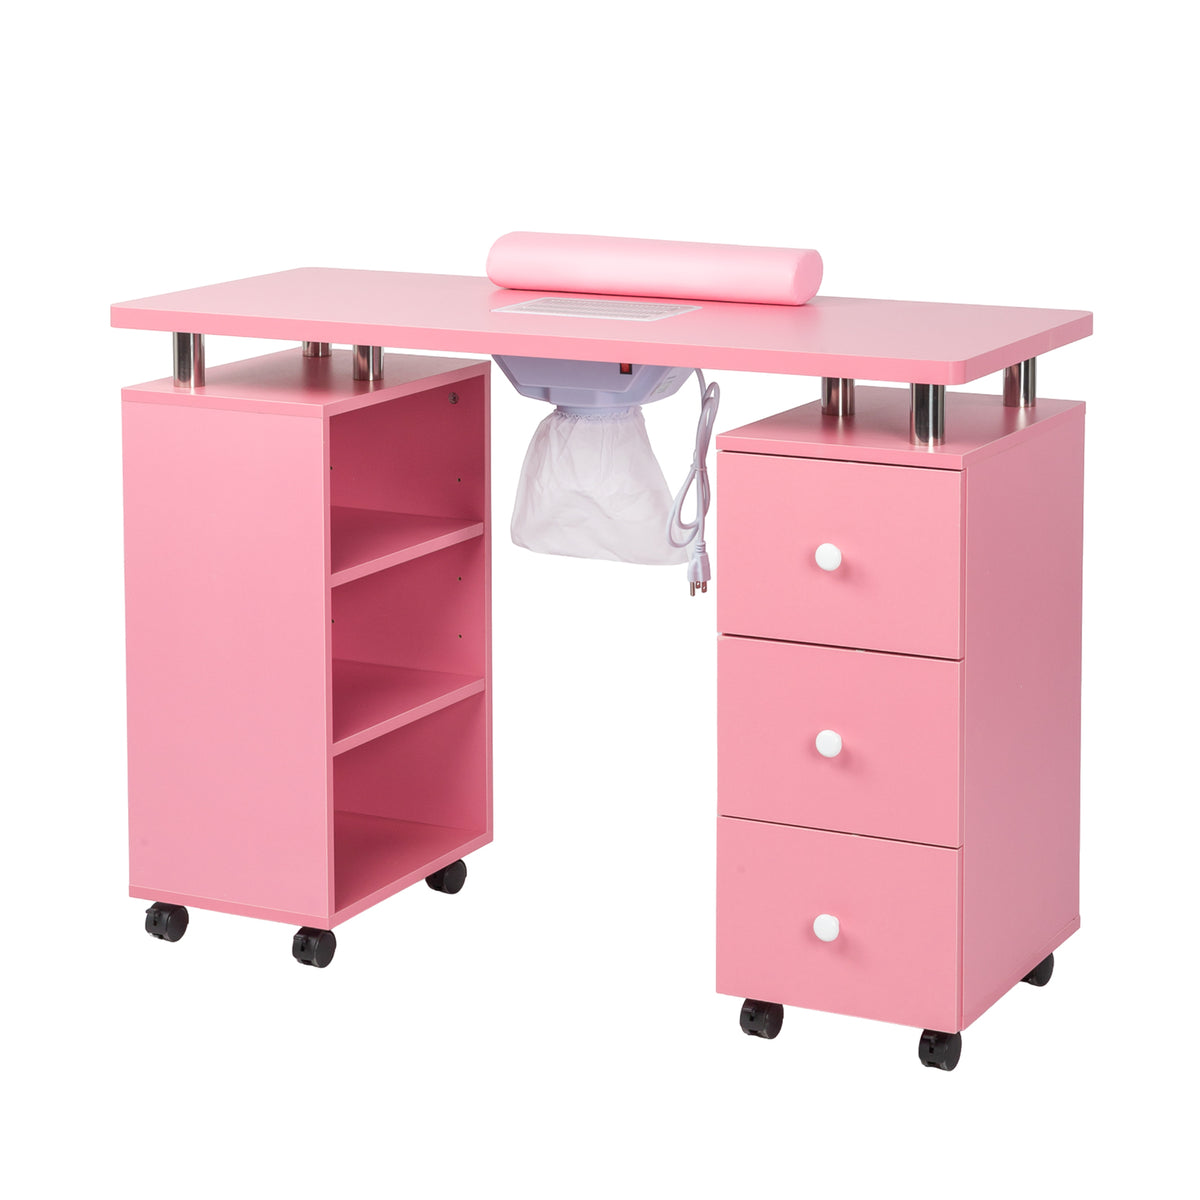 Omysalon Nail Manicure Table w/Electric Dust Collector & Wrist Rest & 3 Layers Open Side Cabinets 3 Drawers